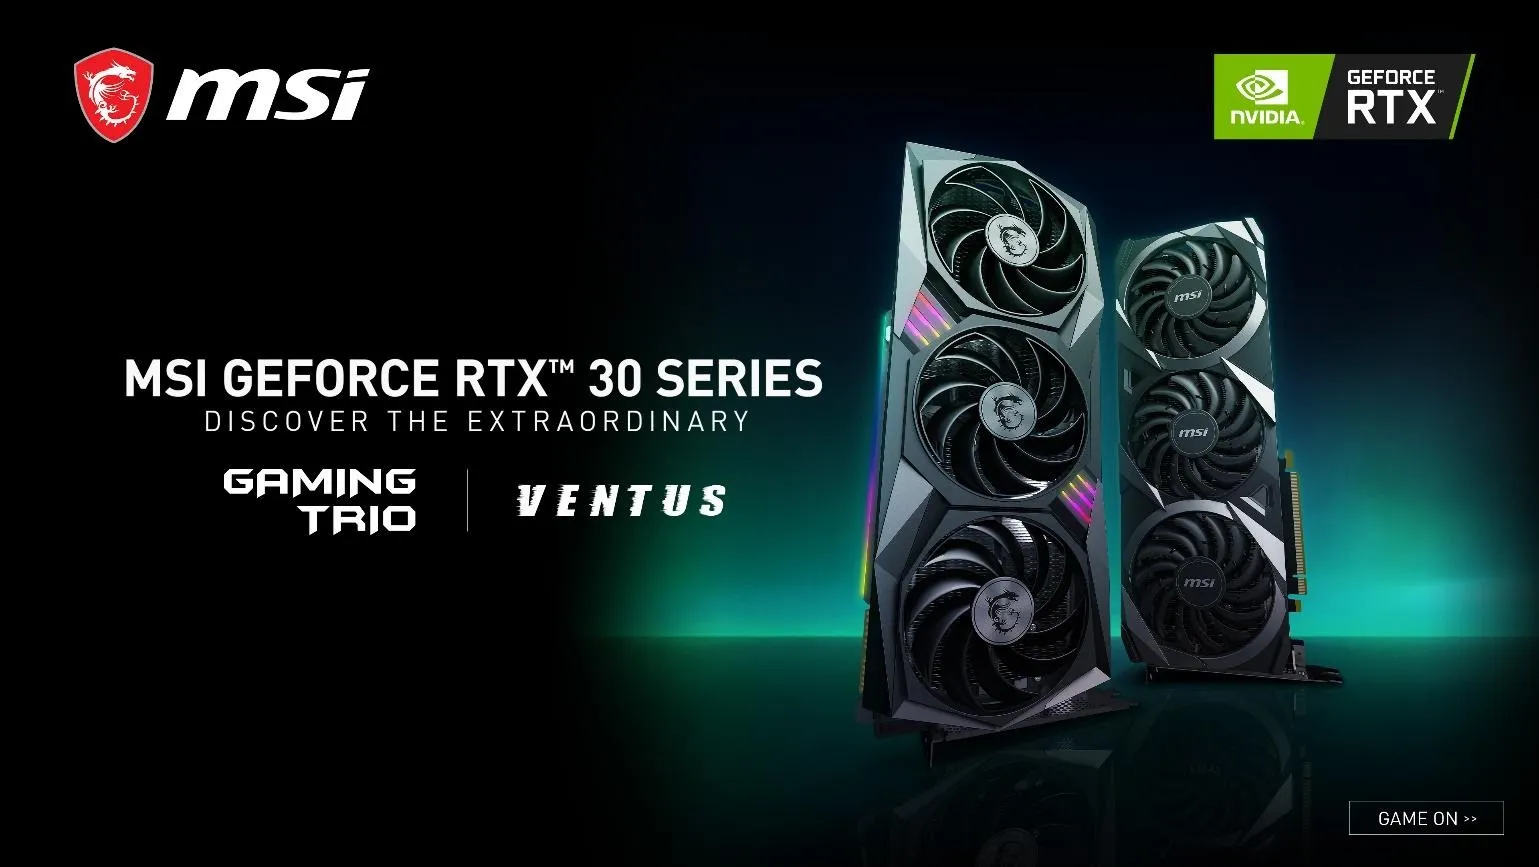 Pengeudlån fintælling pelleten MSI RTX 3000 Series GPUs revealed with a livestream coming Sep. 2